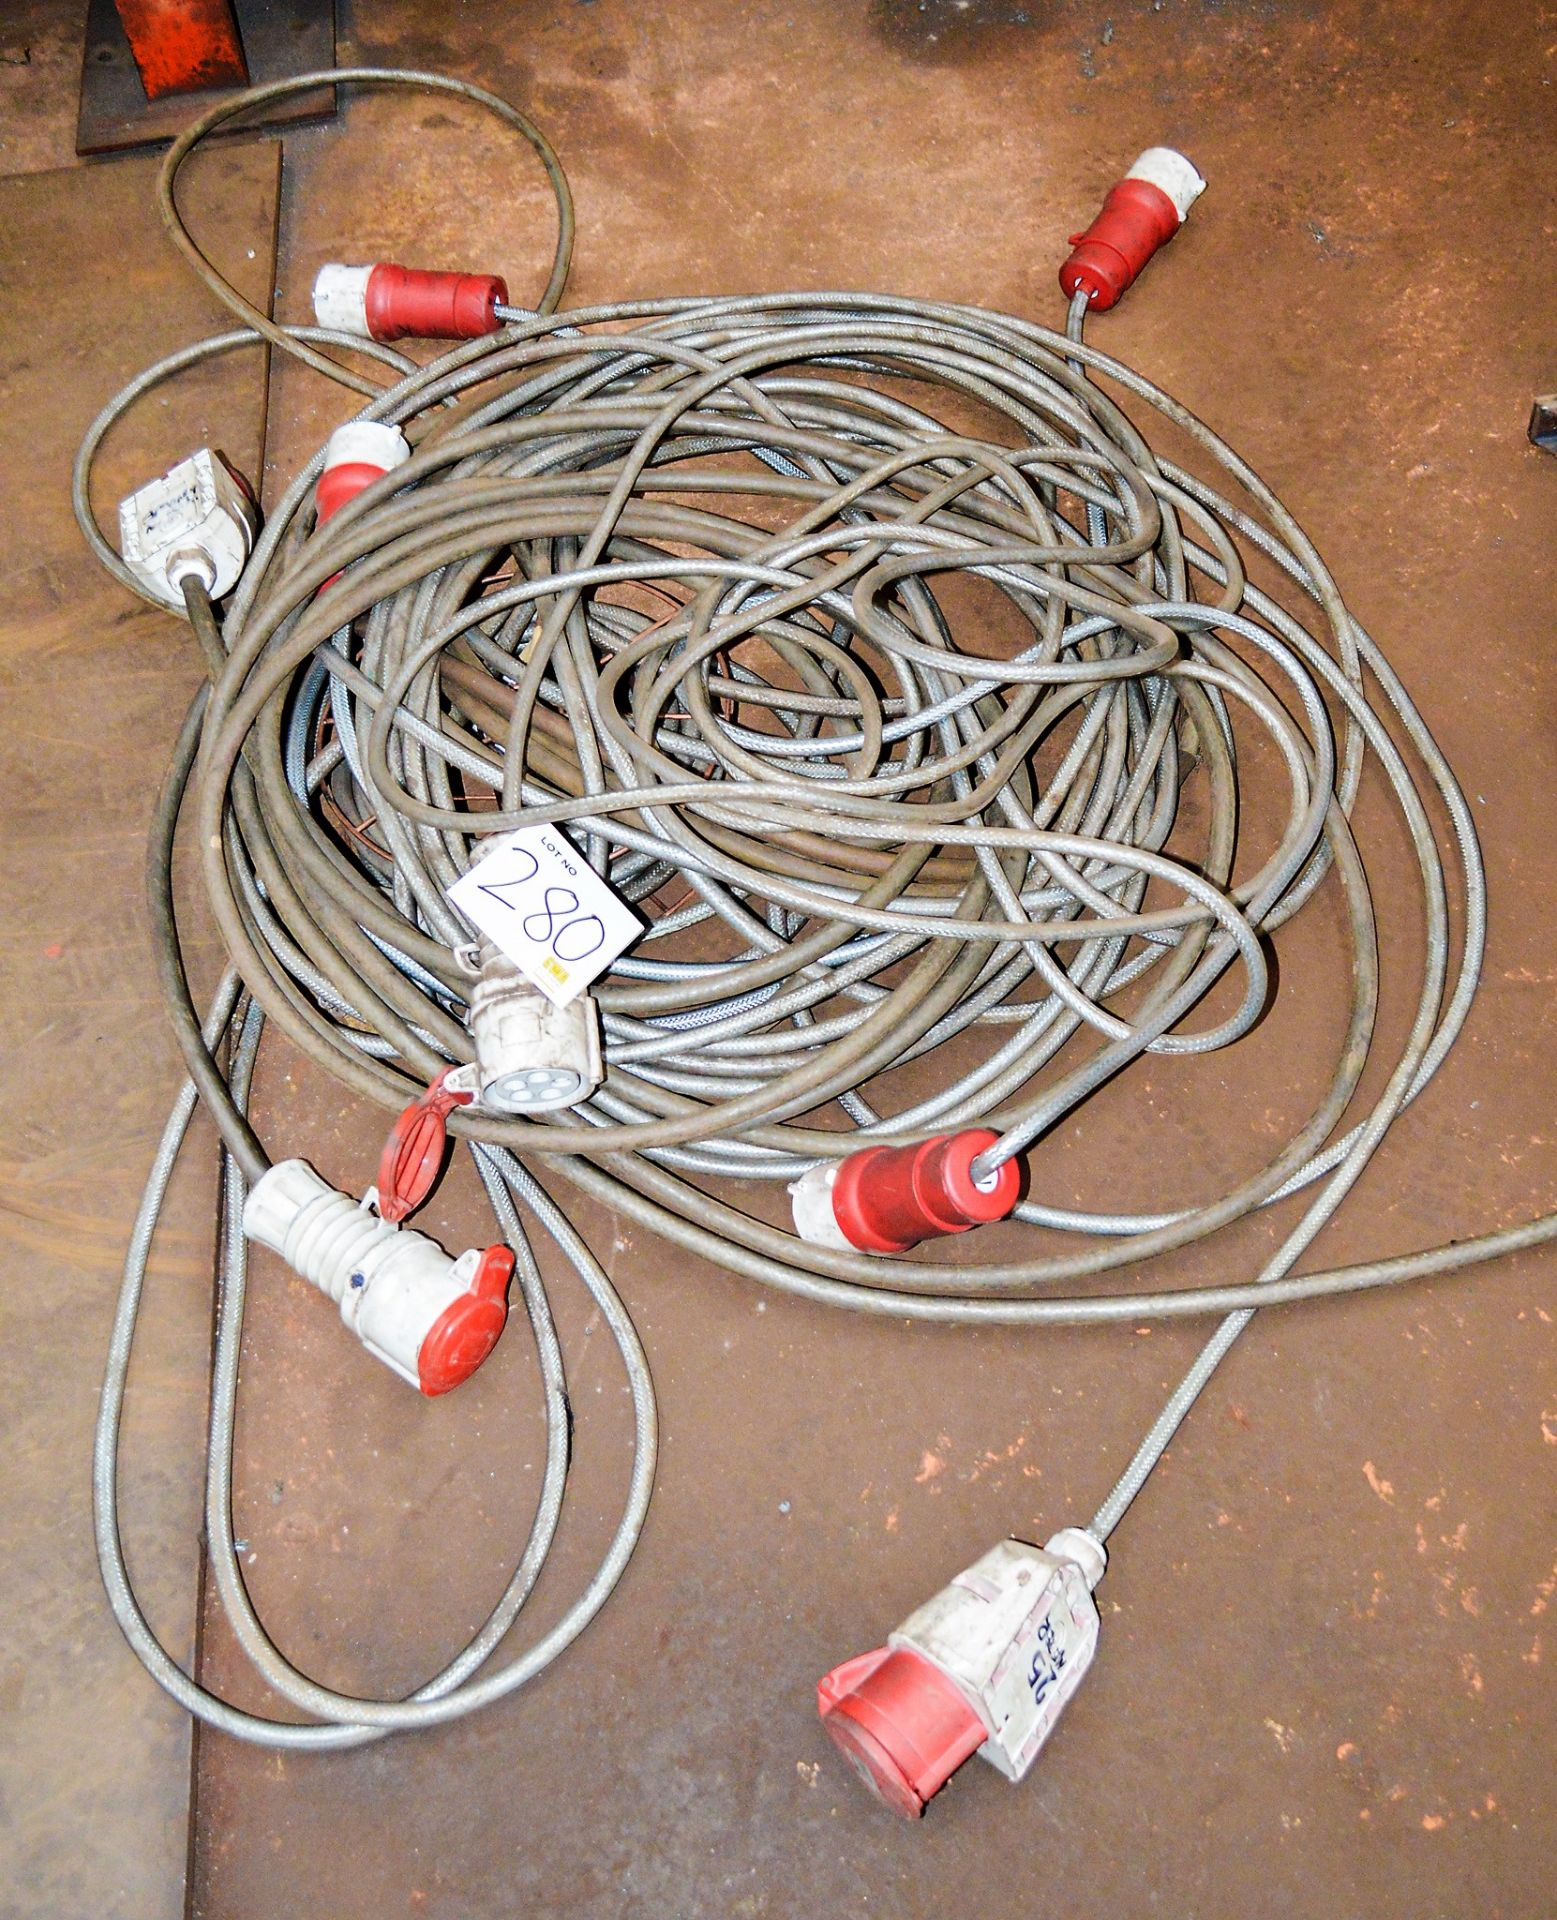 Quantity of 3 phase extension cables